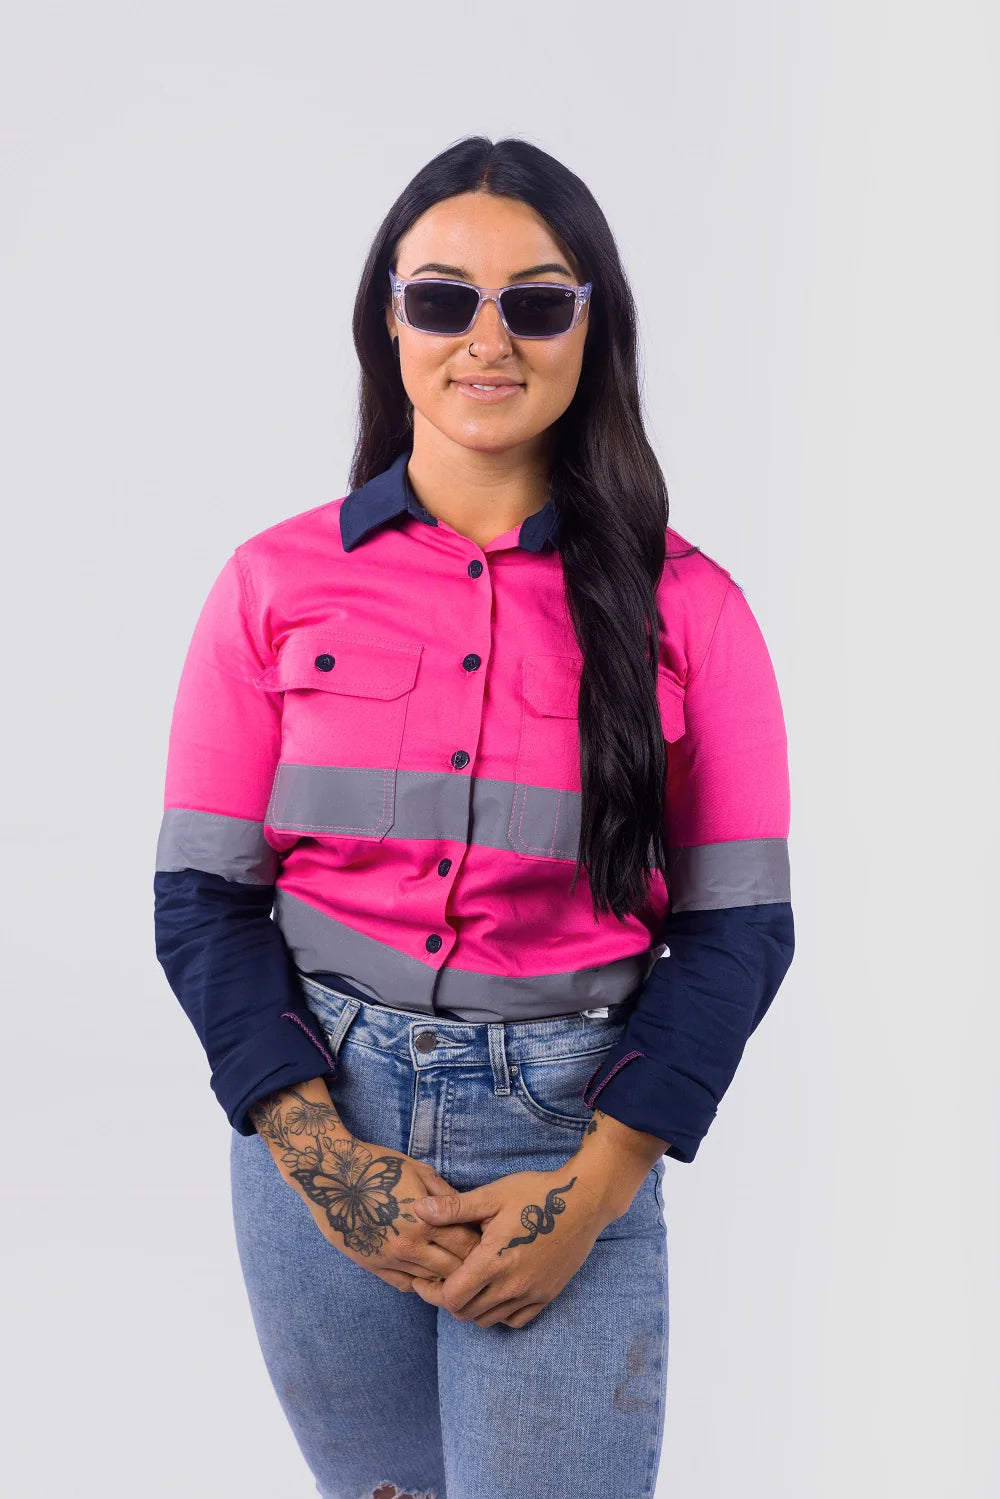 Ugly Fish RS242S P.SM Twister S - Ladies Smaller Fit Safety Sunglasses- Pink Frame/Smoke Lens